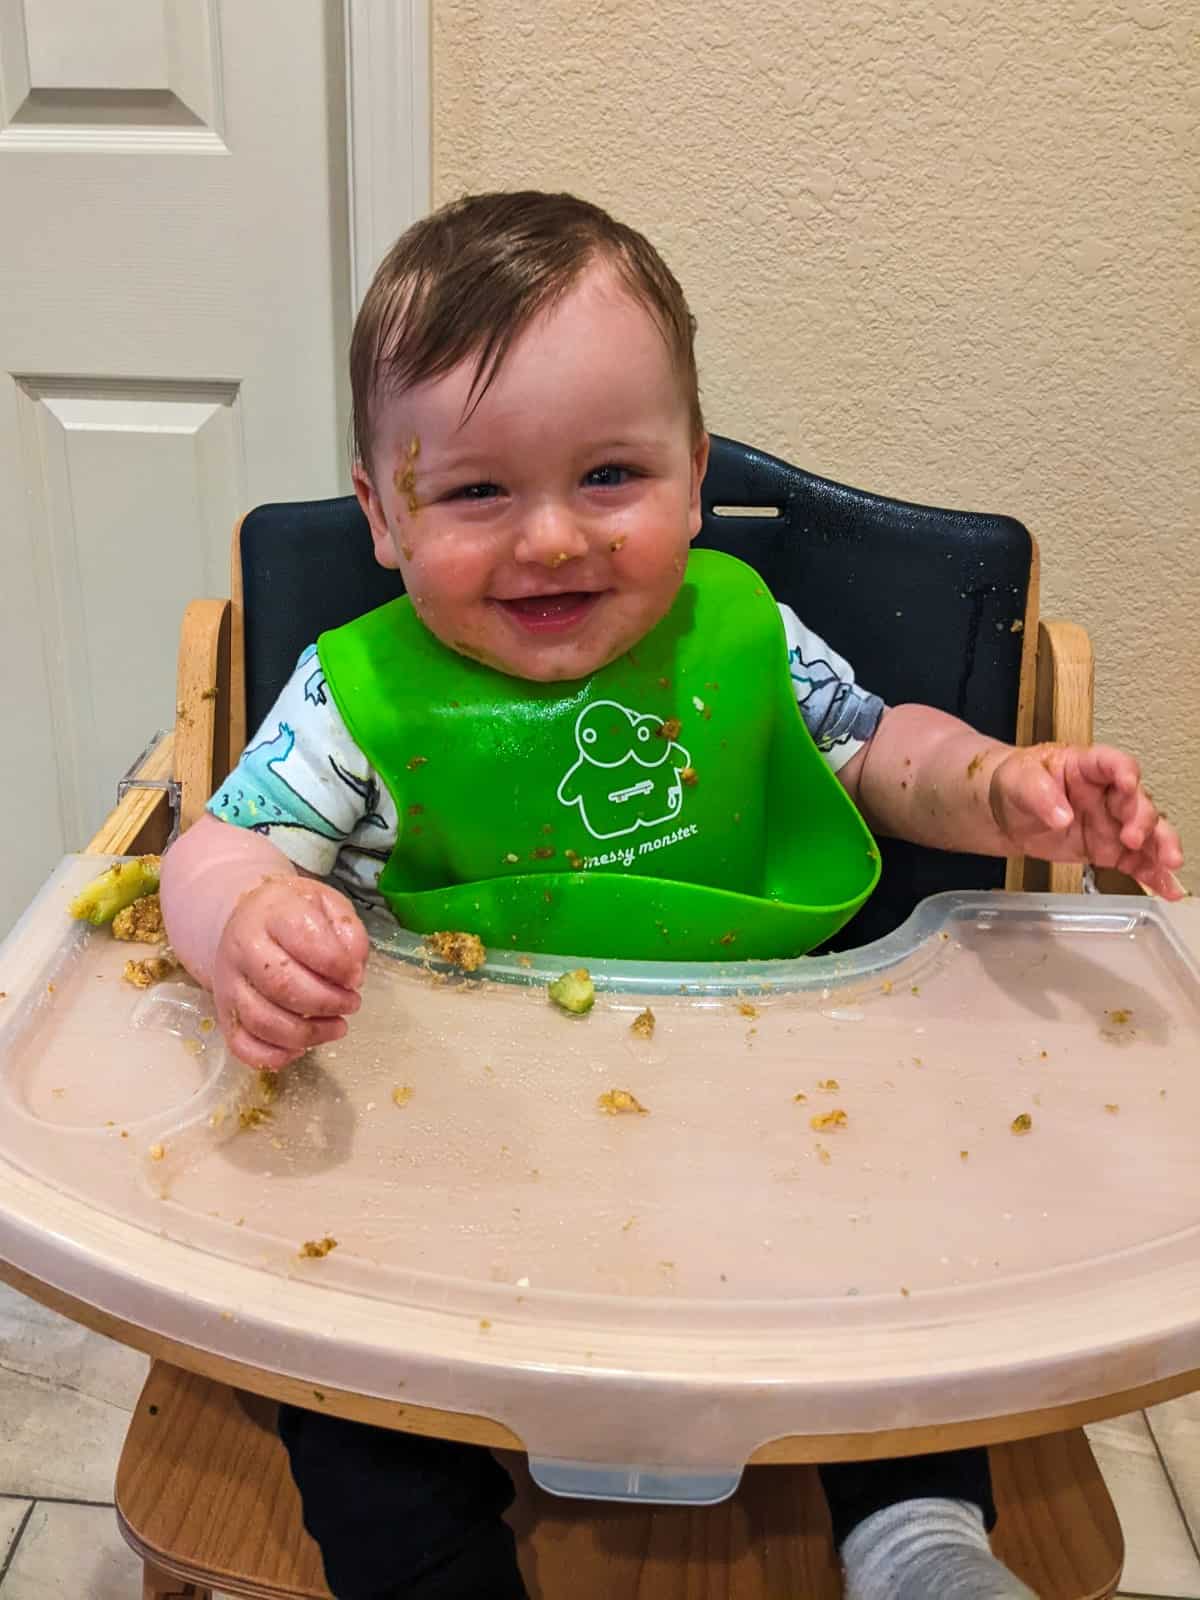 Baby after finishing his food with a dirty face and hands.